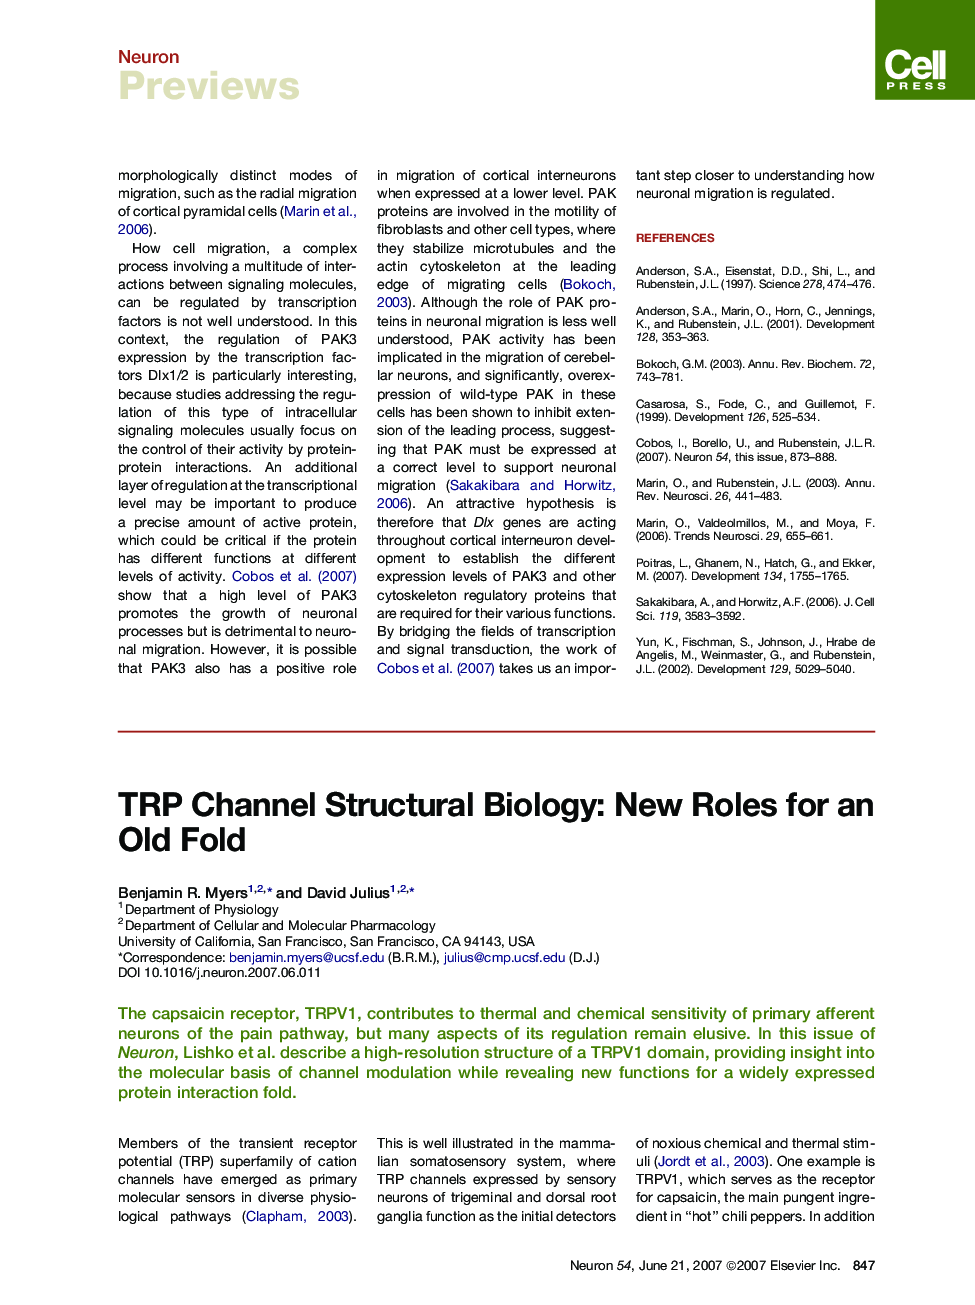 TRP Channel Structural Biology: New Roles for an Old Fold